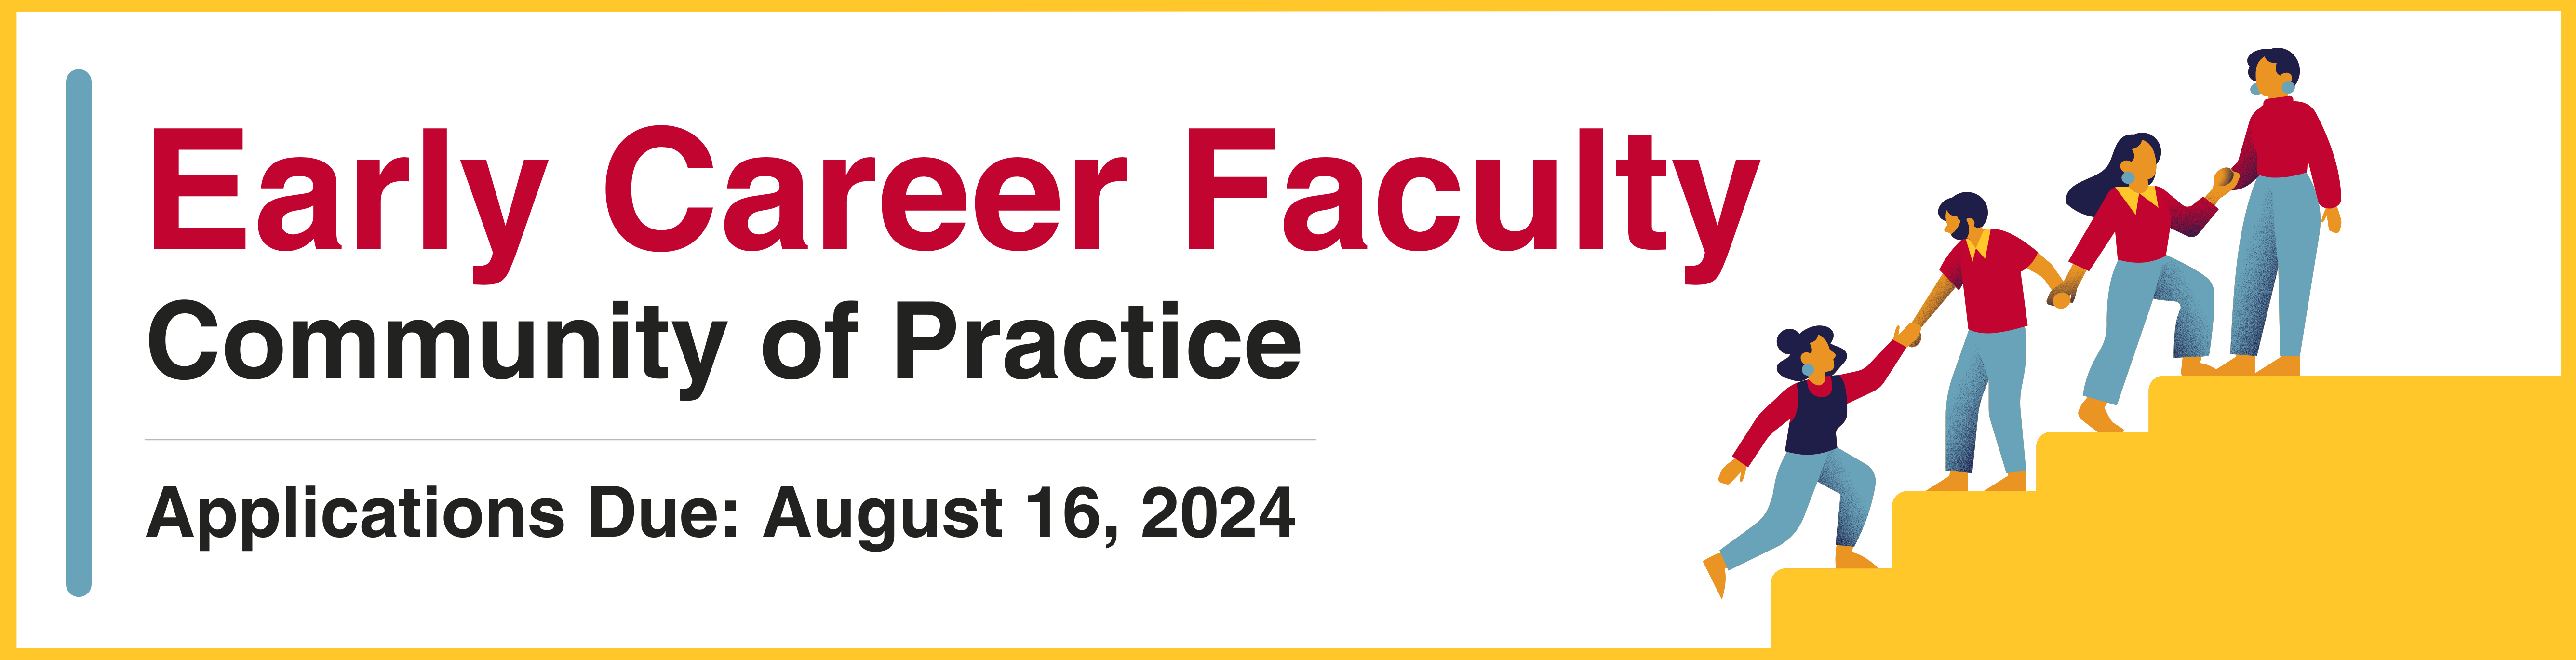 Early Career Faculty Community of Practice Banner